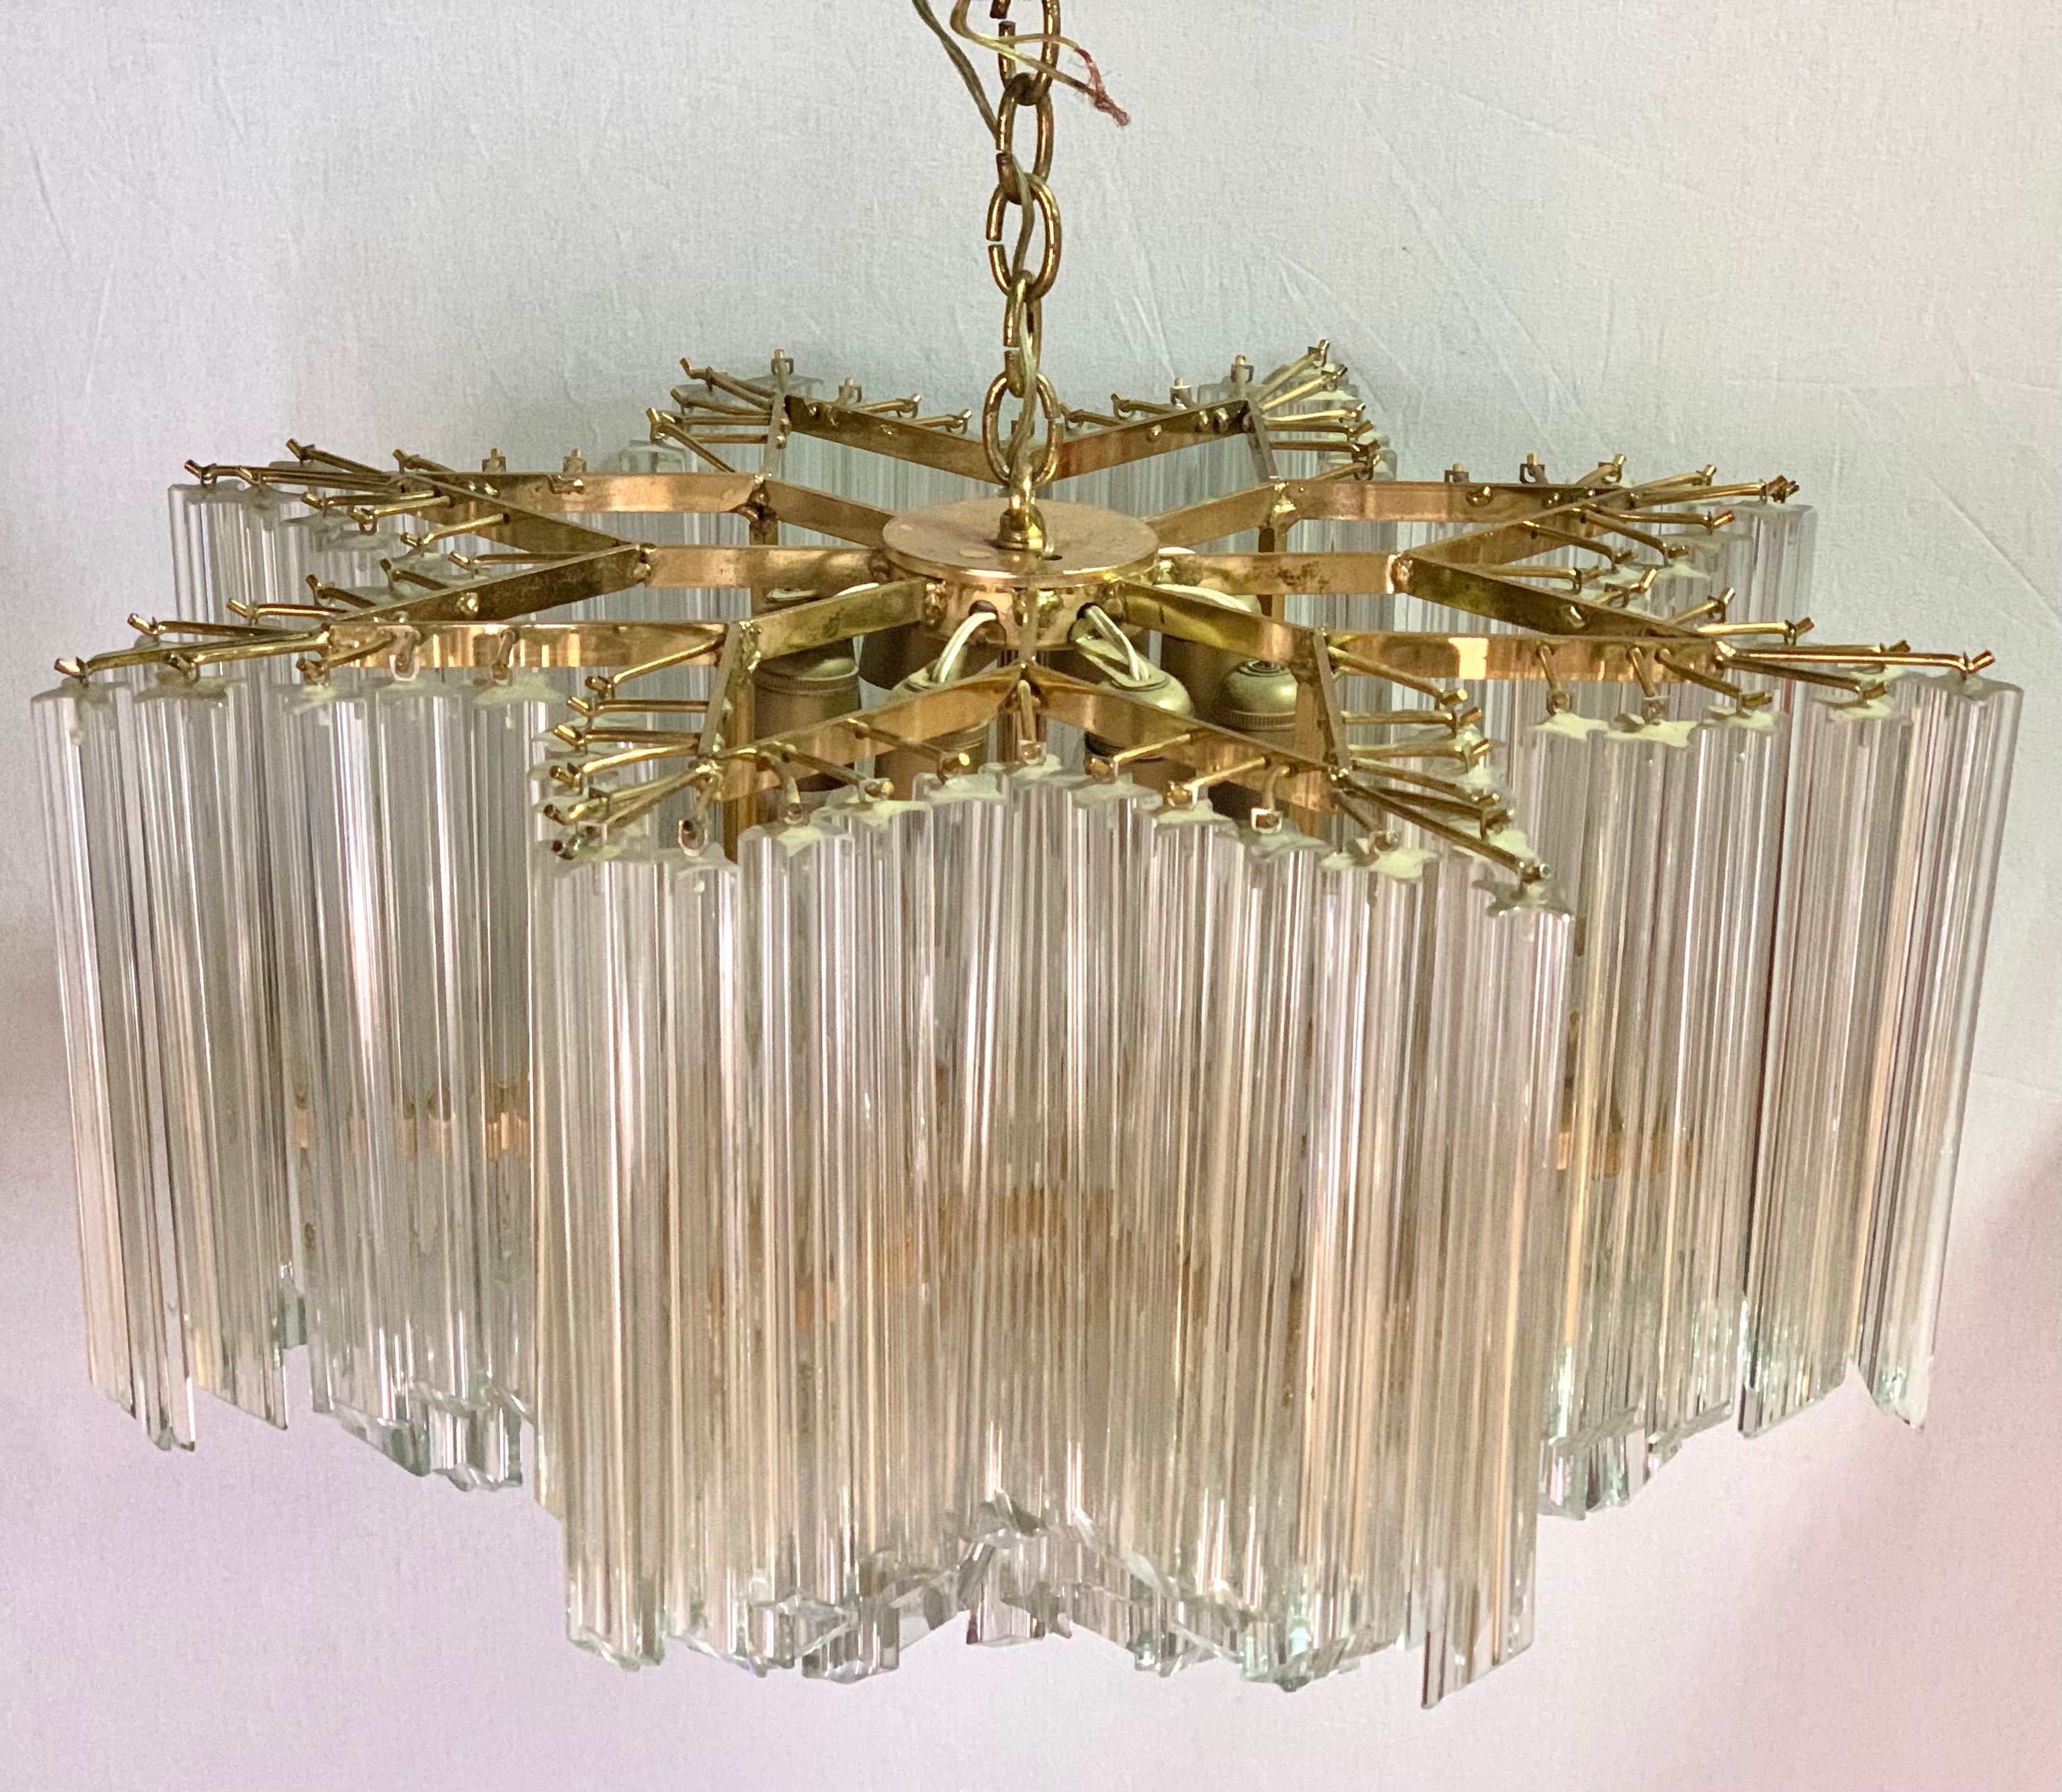 Magnificent large Camer Glass mid century modern chandelier featuring murano glass hanging prisms throughout. Each prism has a hook and hangs straight down from a star shaped fixture There are two different length prisms that, when hung, make this